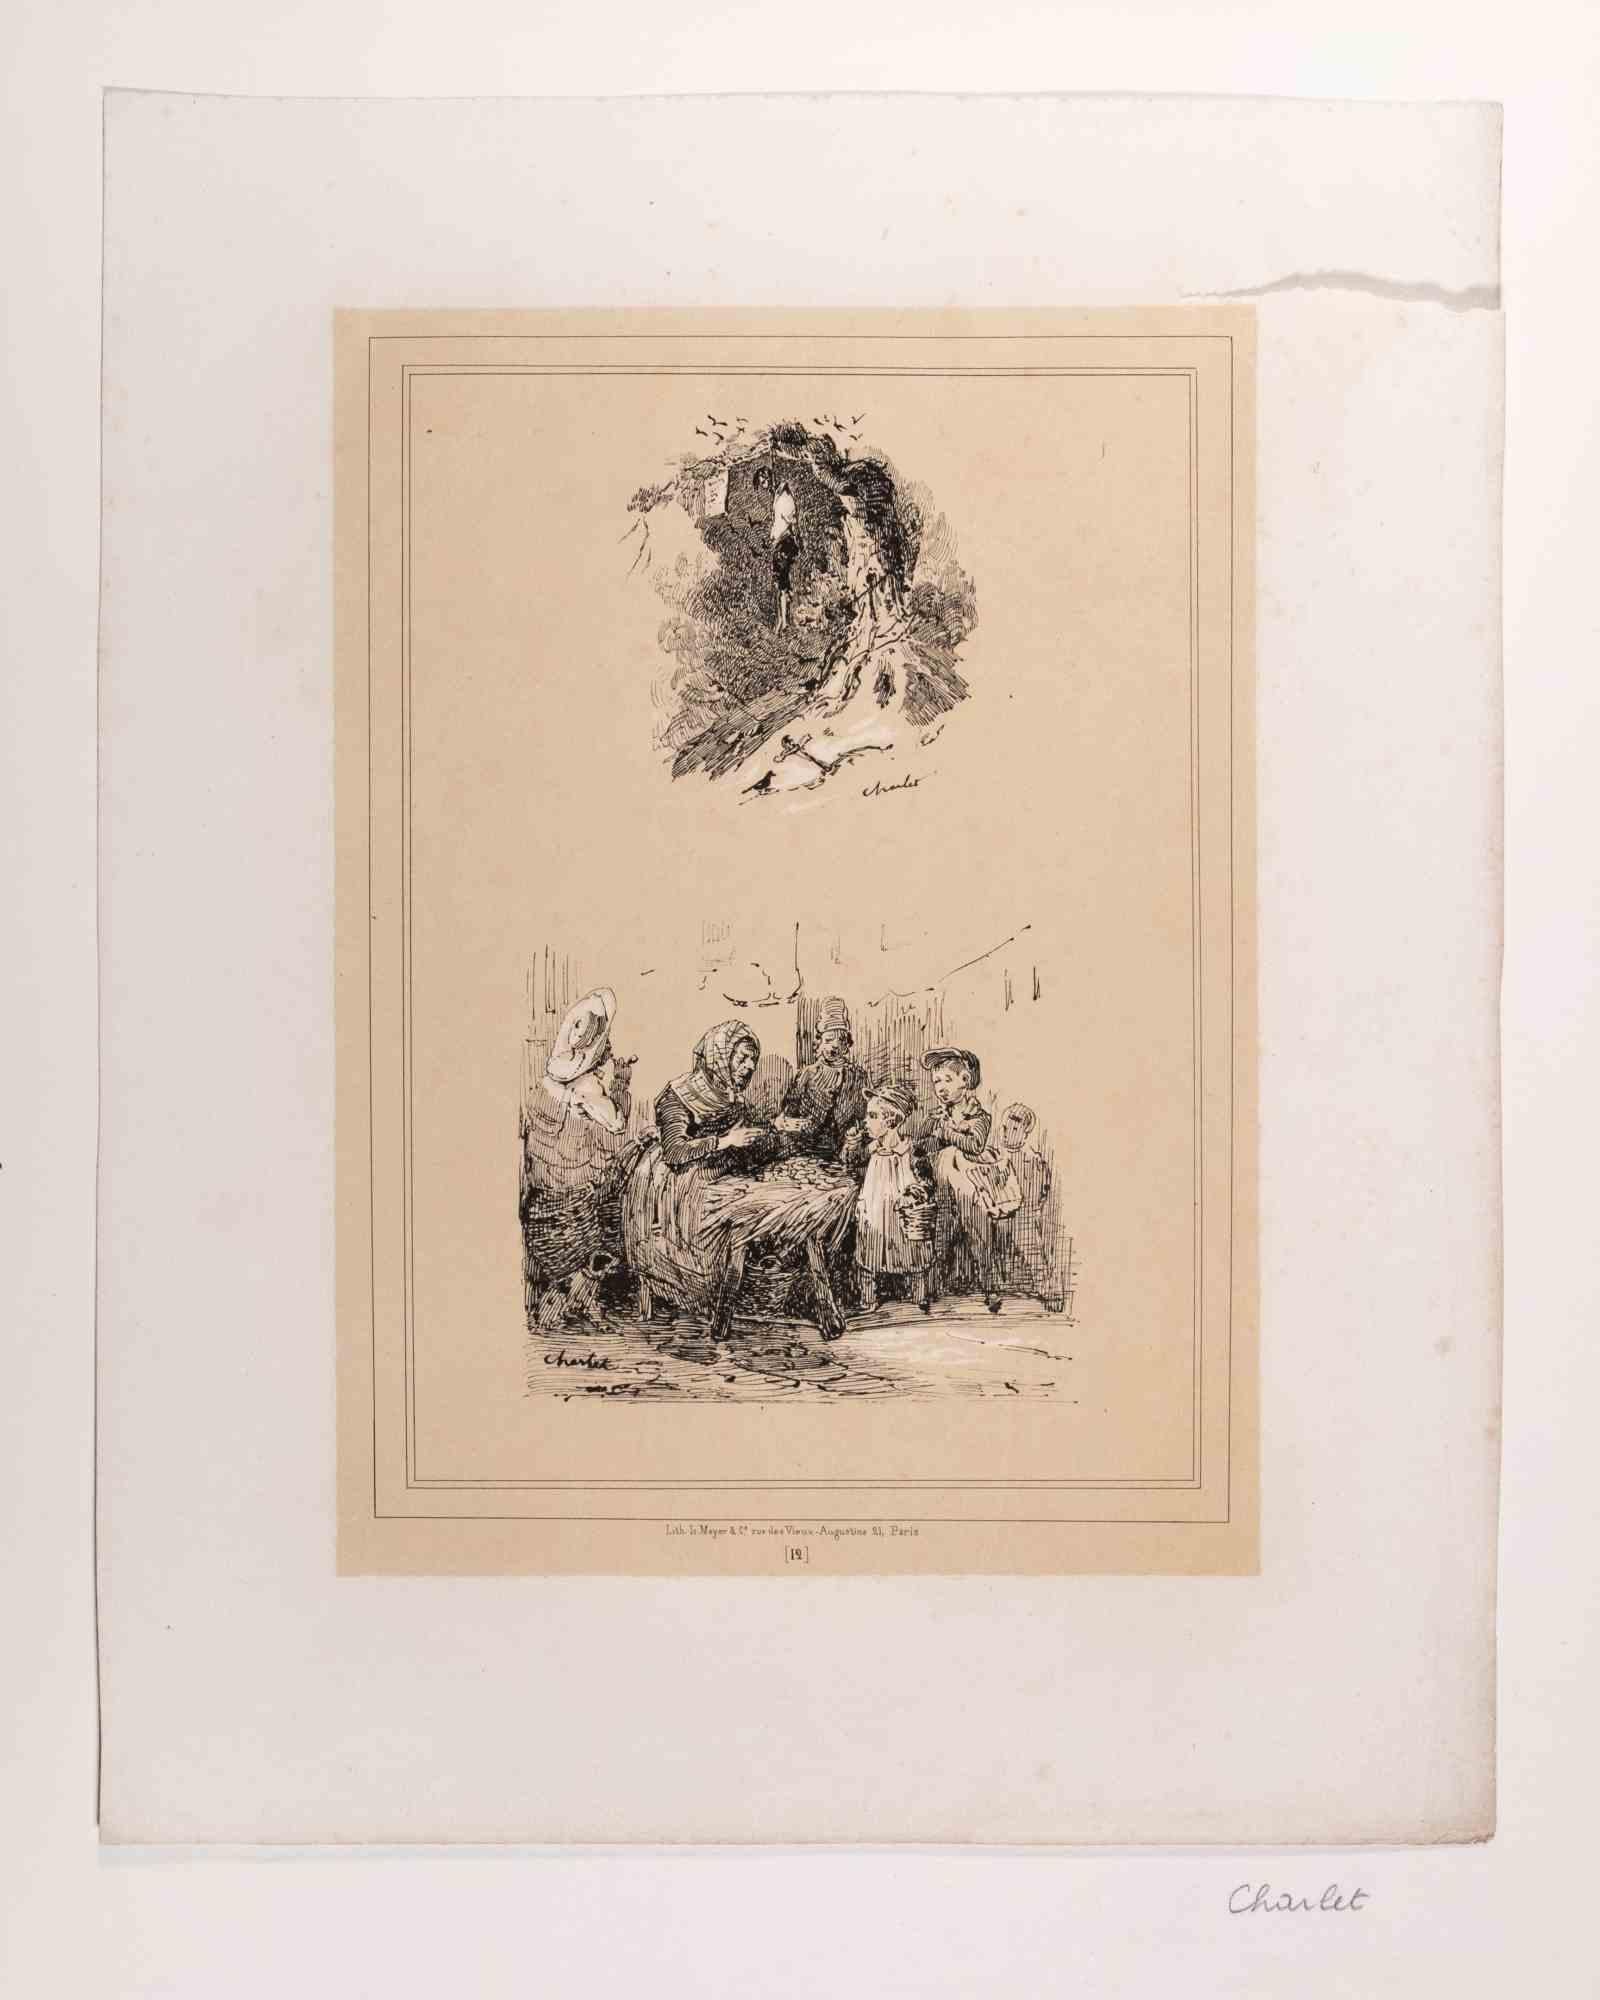 The Grandma tells her grandchildren a tale is an original artwork realized by Nicolas Toussaint Charlet (1792-1845). Lithograph print. Signed in plate on the lower left and under the second image. Is not dated but we can attribute the period early